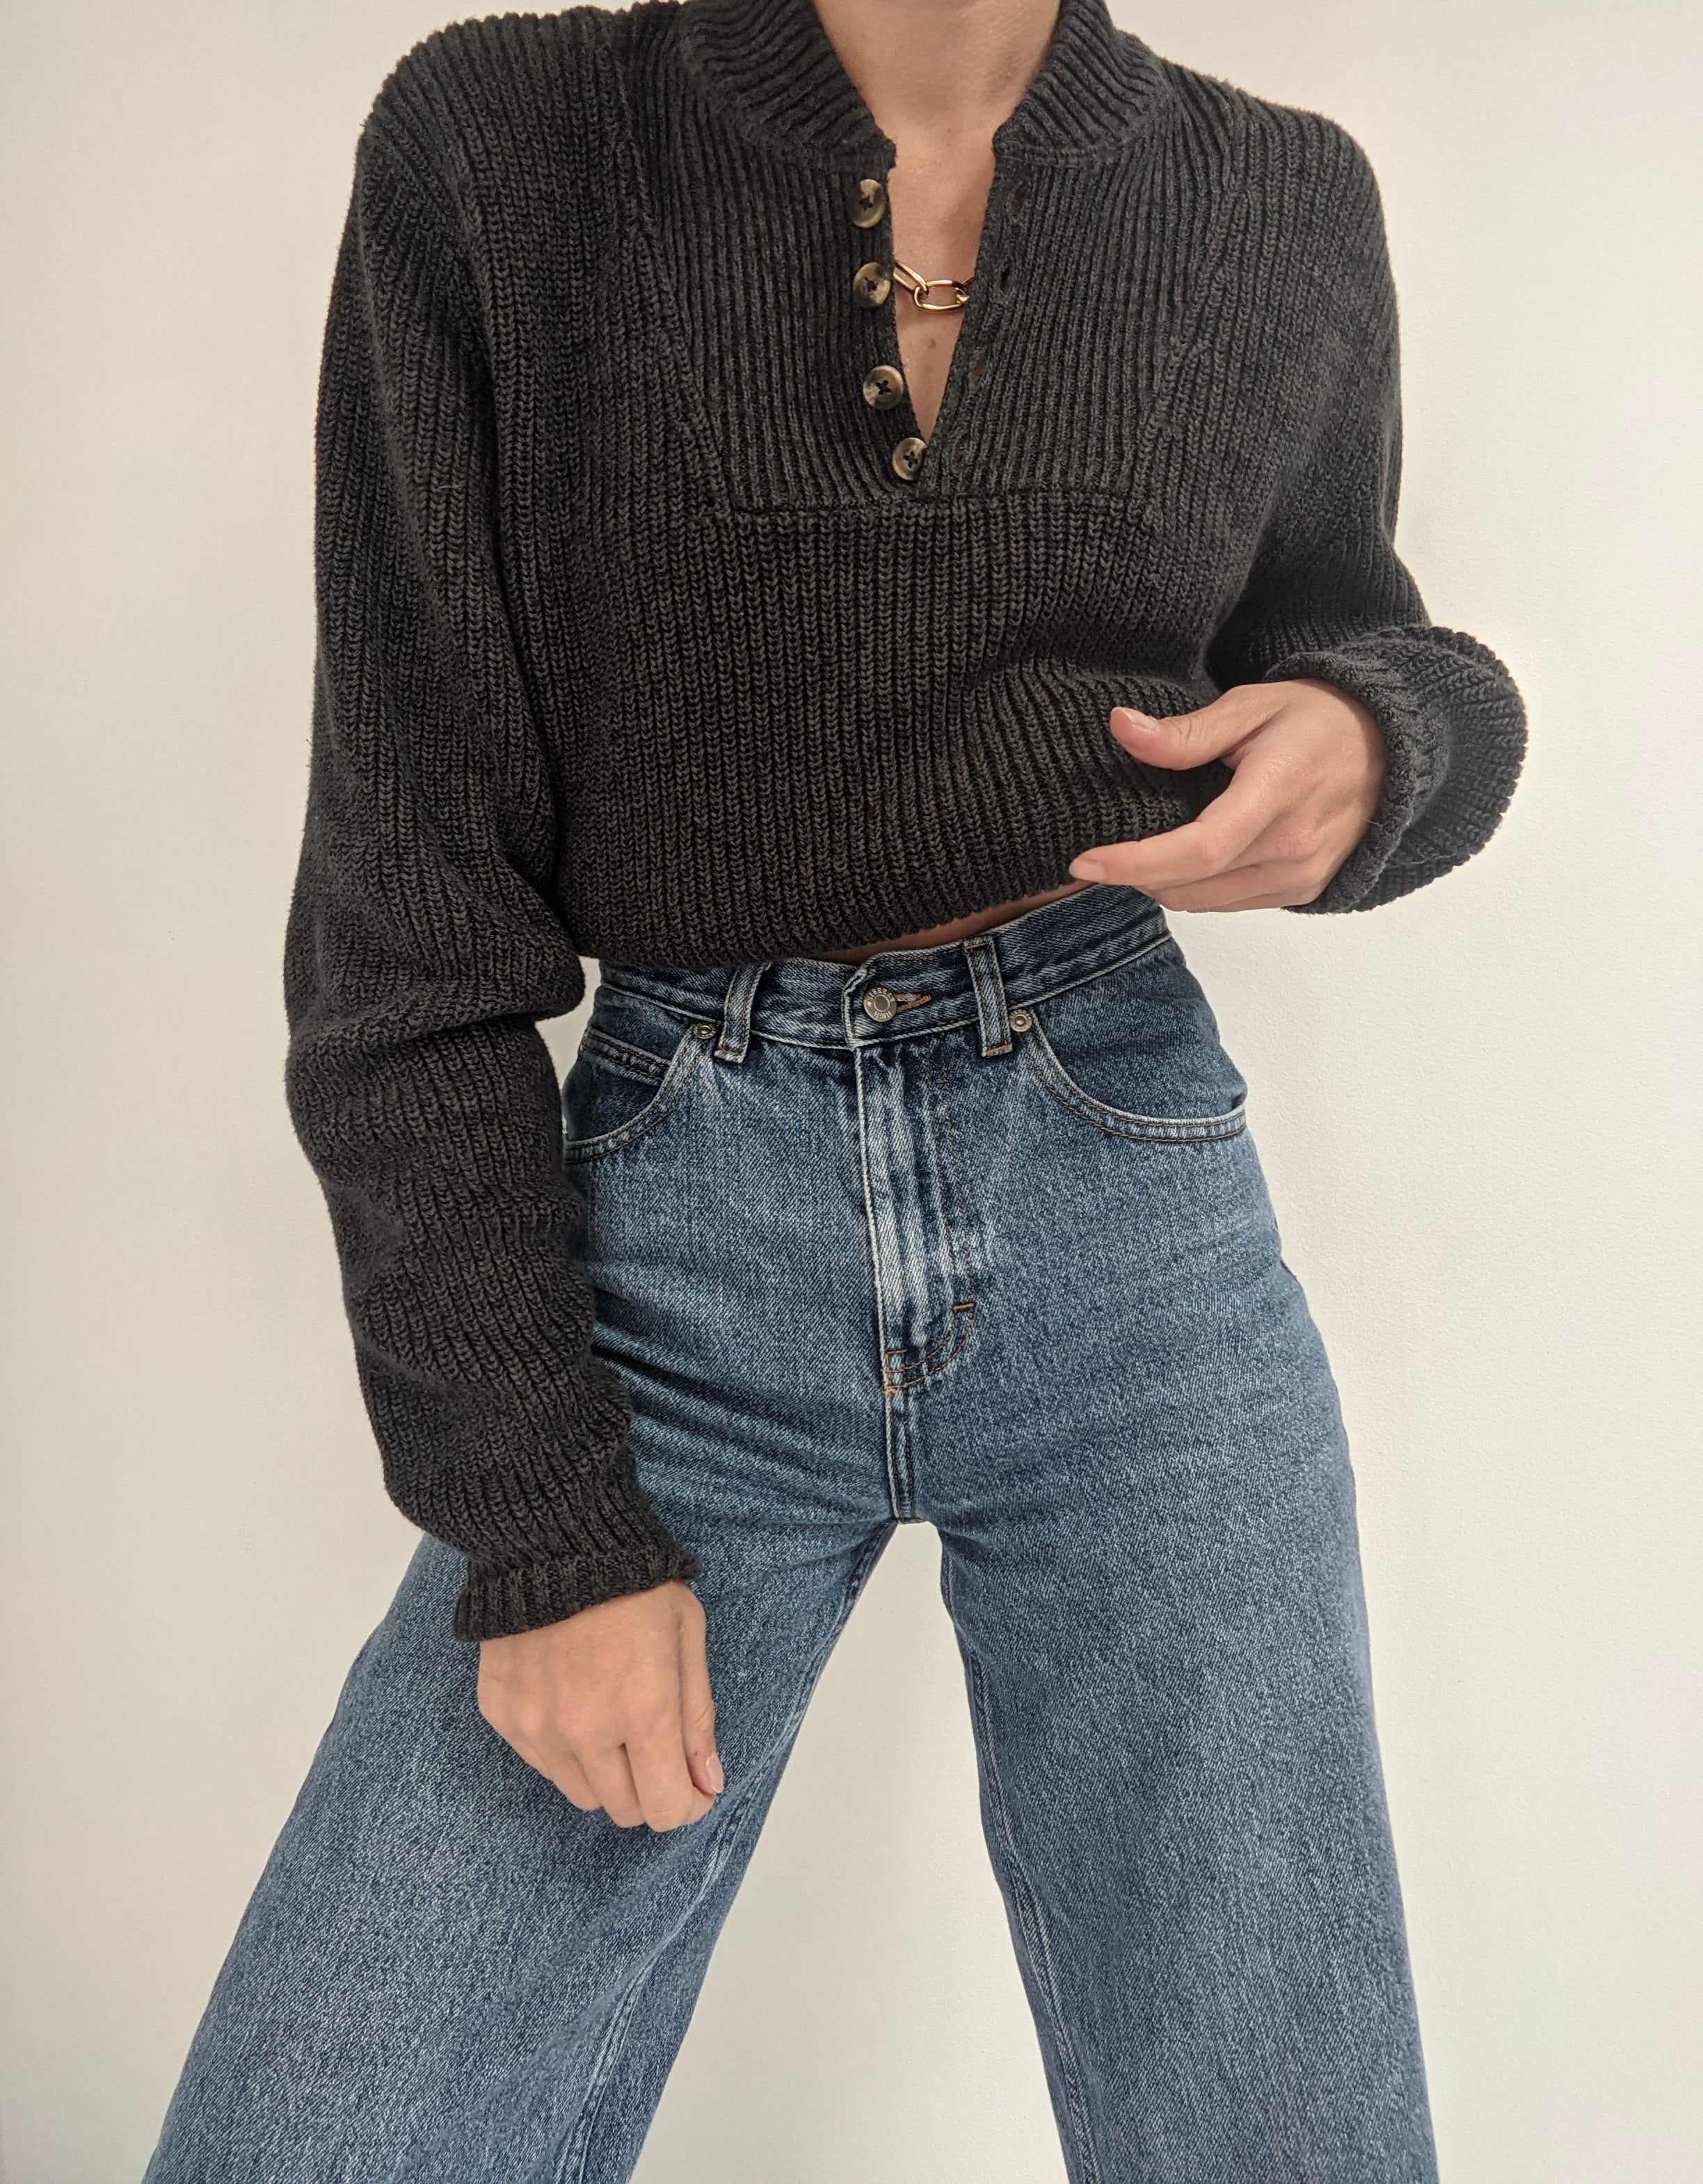 90s Charcoal Knit Henley